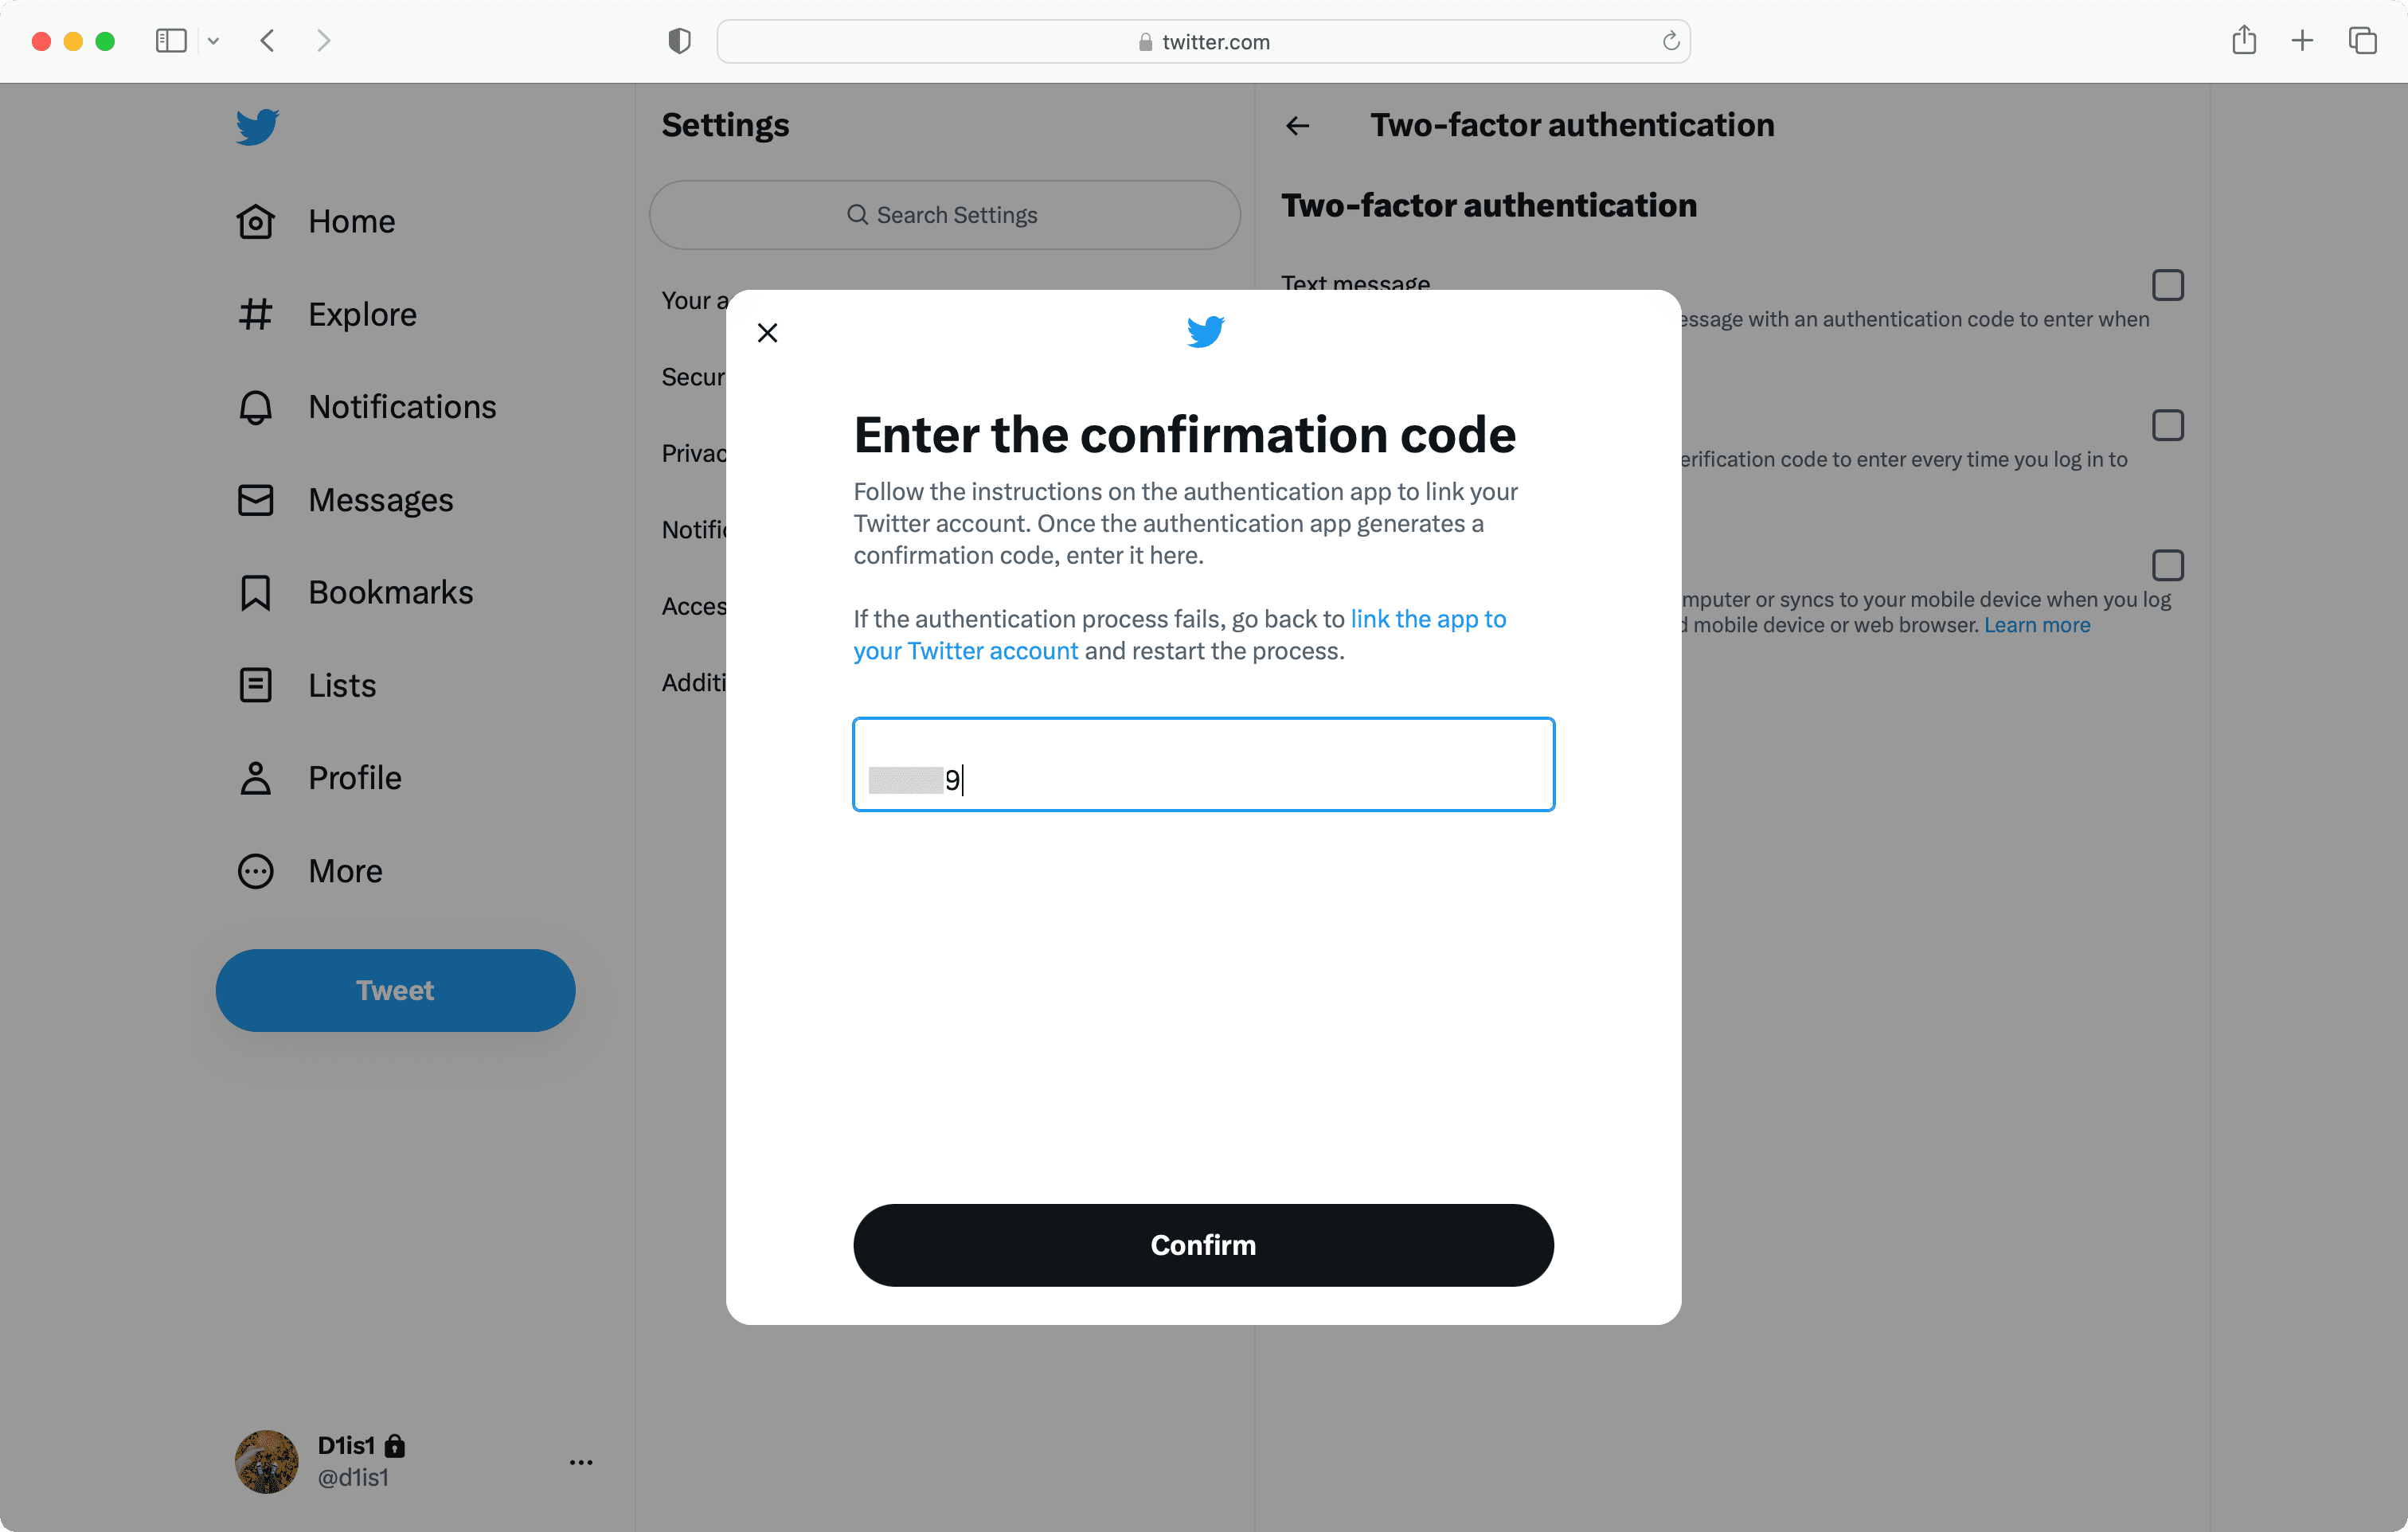 Enter confirmation code to finish Twitter two-factor authentication